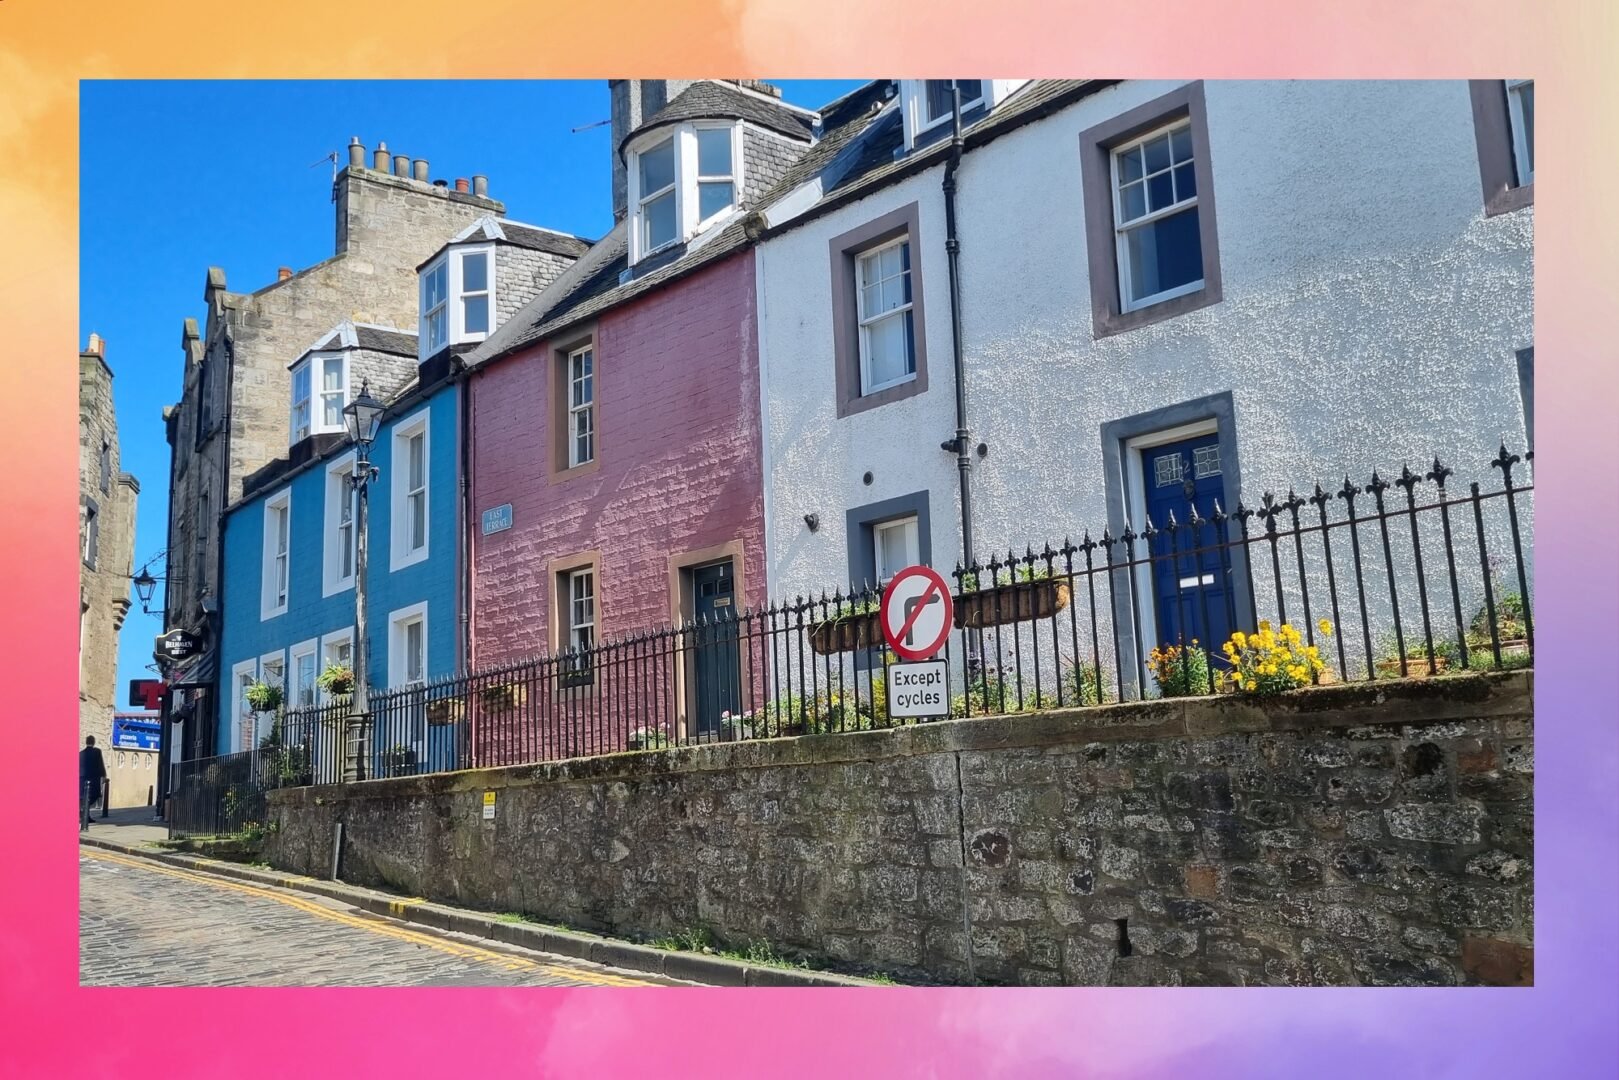 South Queensferry High Street on a sunny day